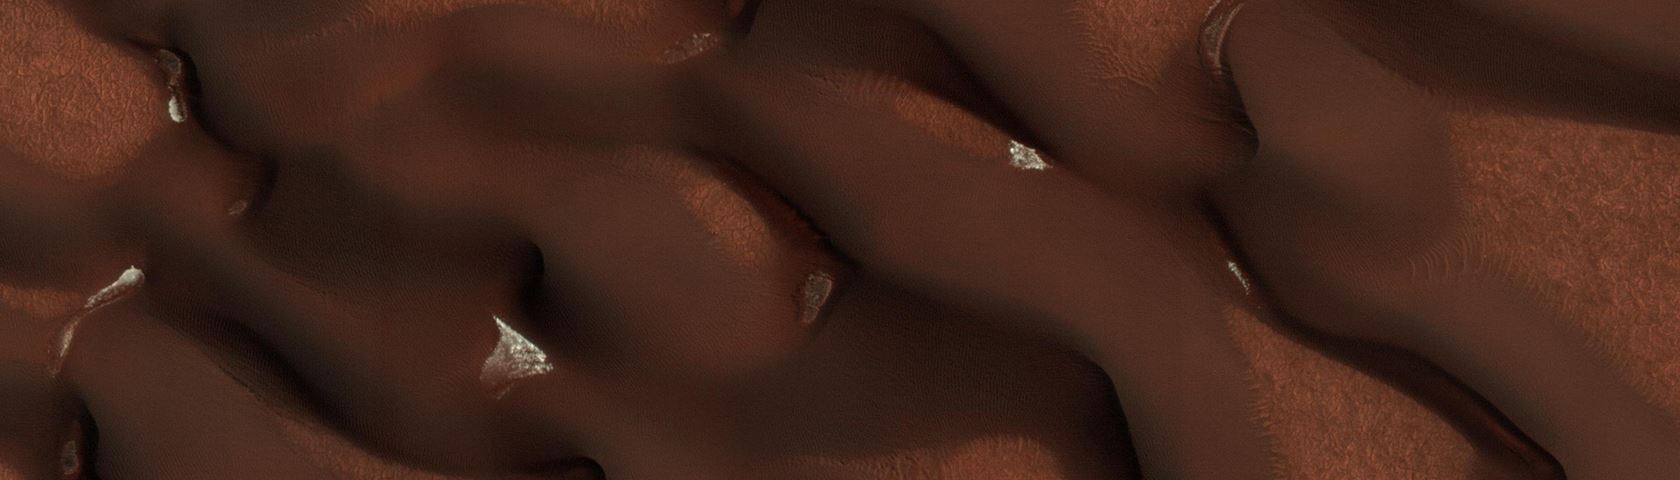 Patches of Snow on Mars Dunes